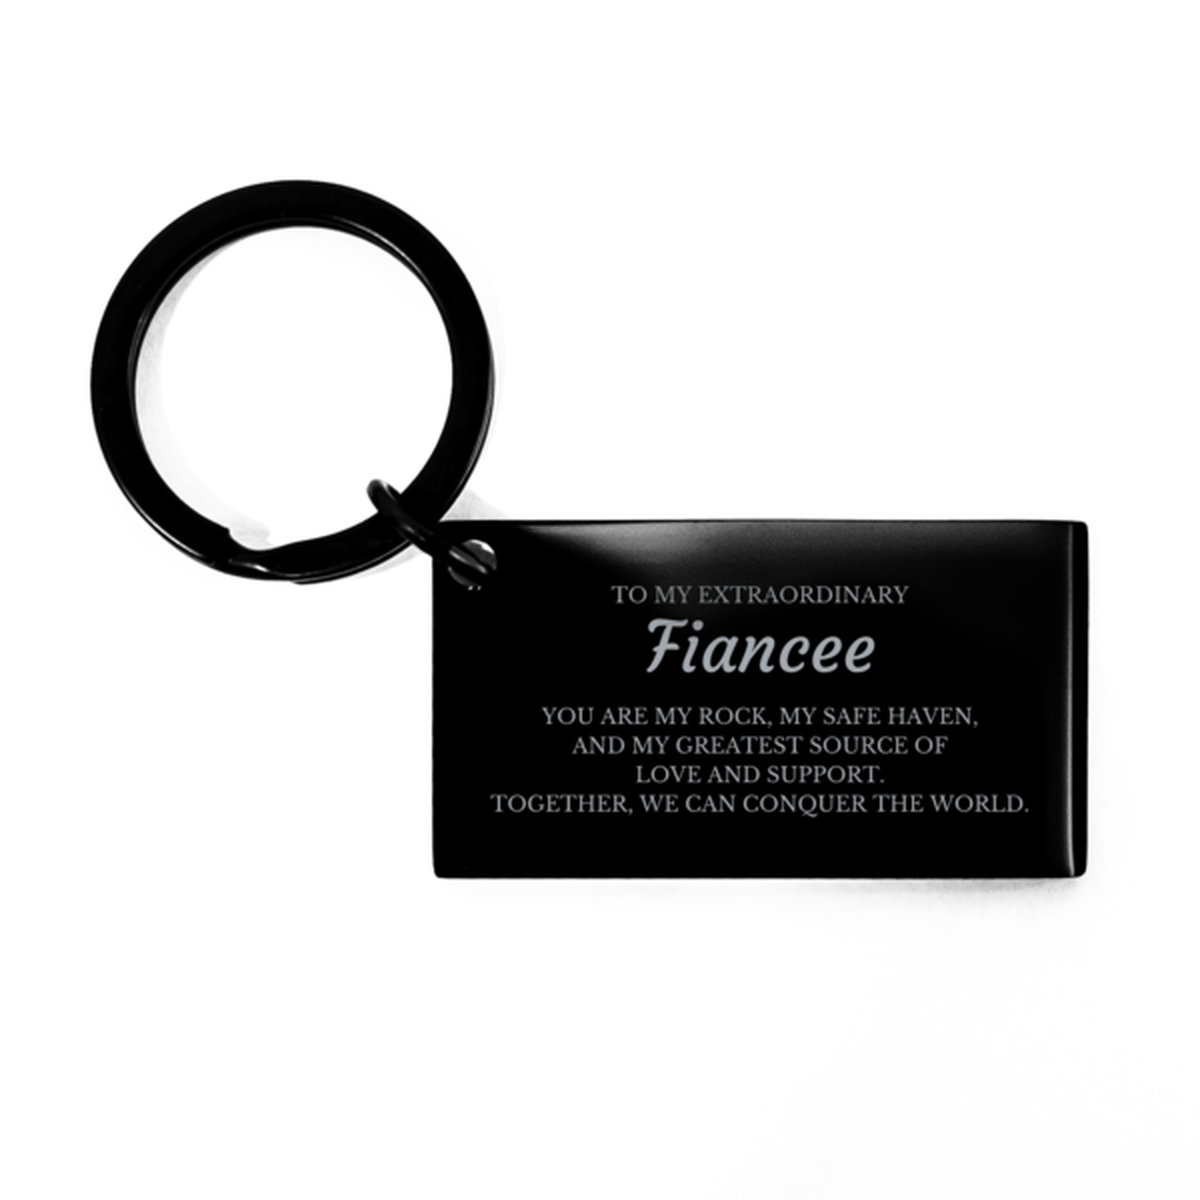 To My Extraordinary Fiancee Gifts, Together, we can conquer the world, Birthday Keychain For Fiancee, Christmas Gifts For Fiancee